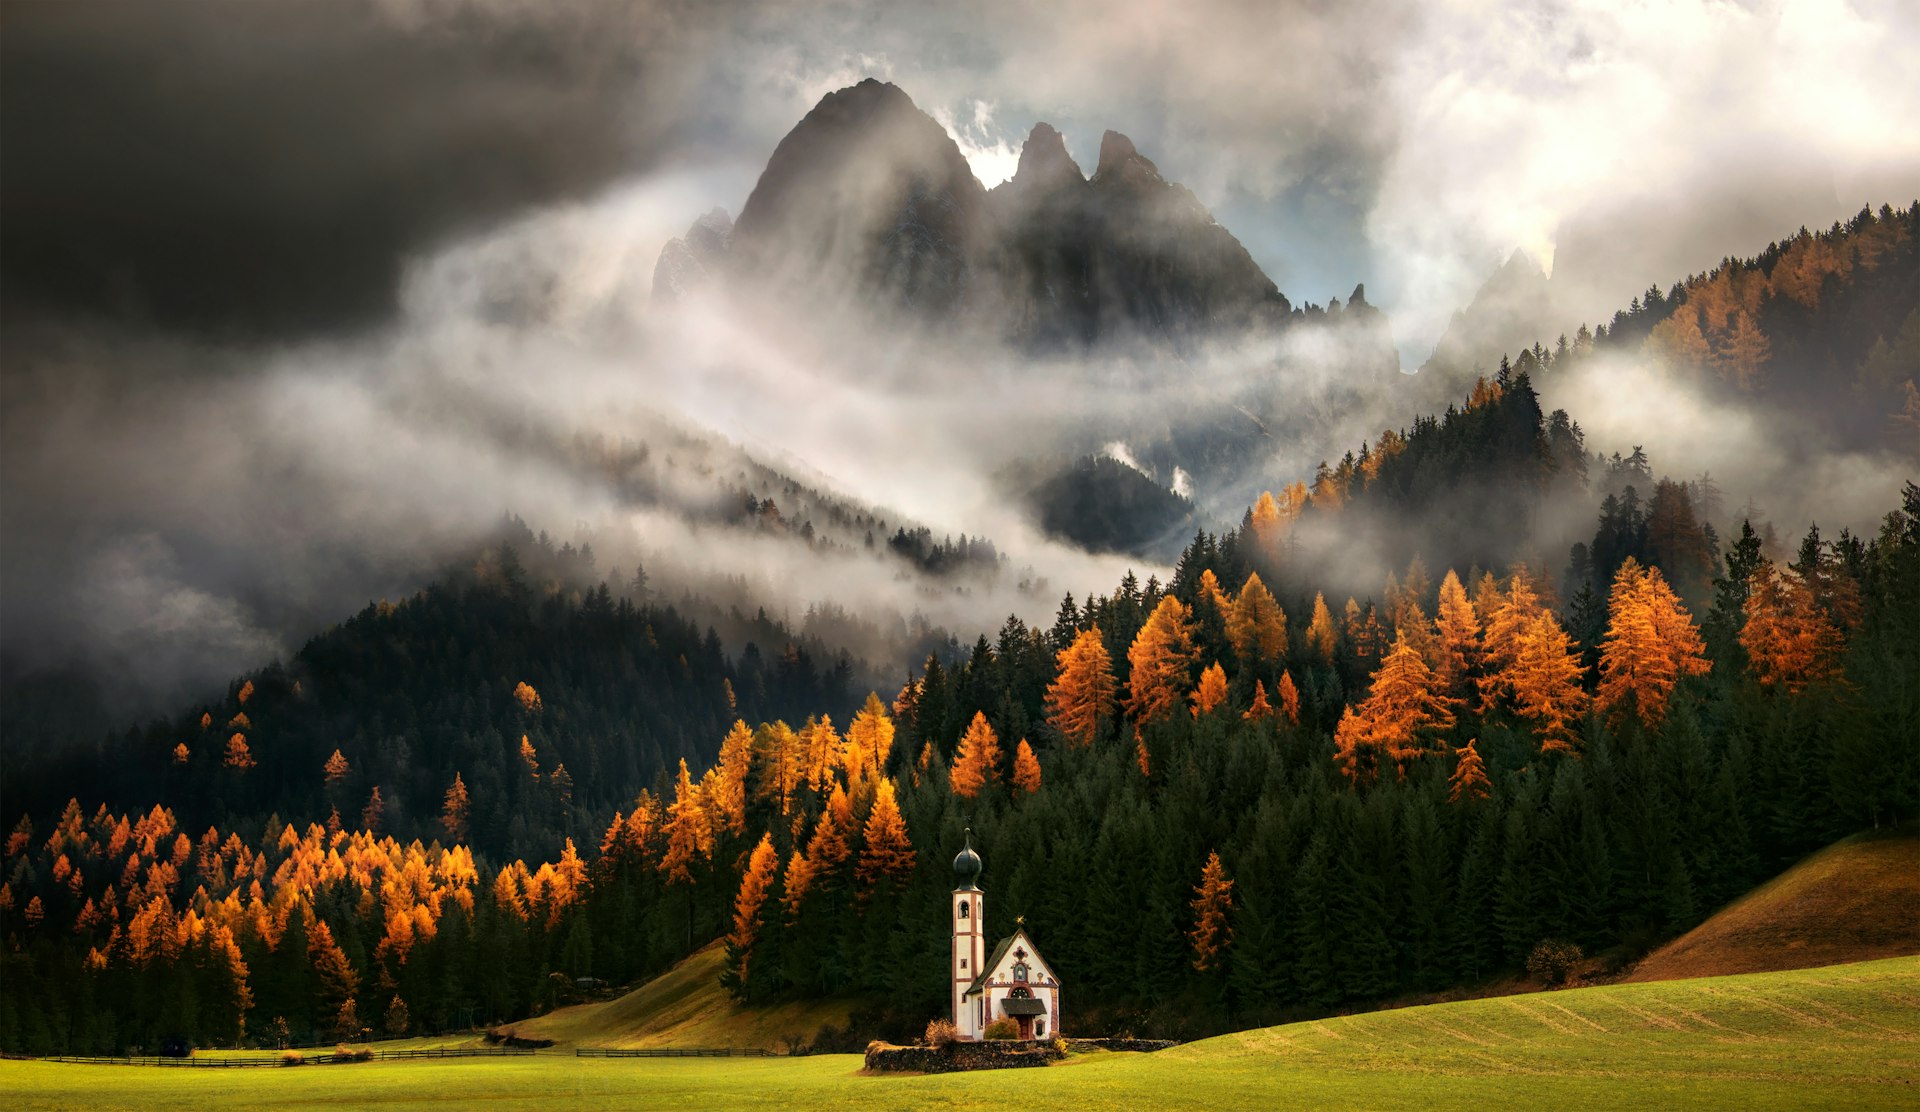 Cloud swirl round craggy Peaks of the dolomites in Italy as forests run down the hillside turning from green into yellows reds and oranges in the autumnal glow with a Russian-style church, Church St. Johann in Ranui, stood at the bottom of the field 